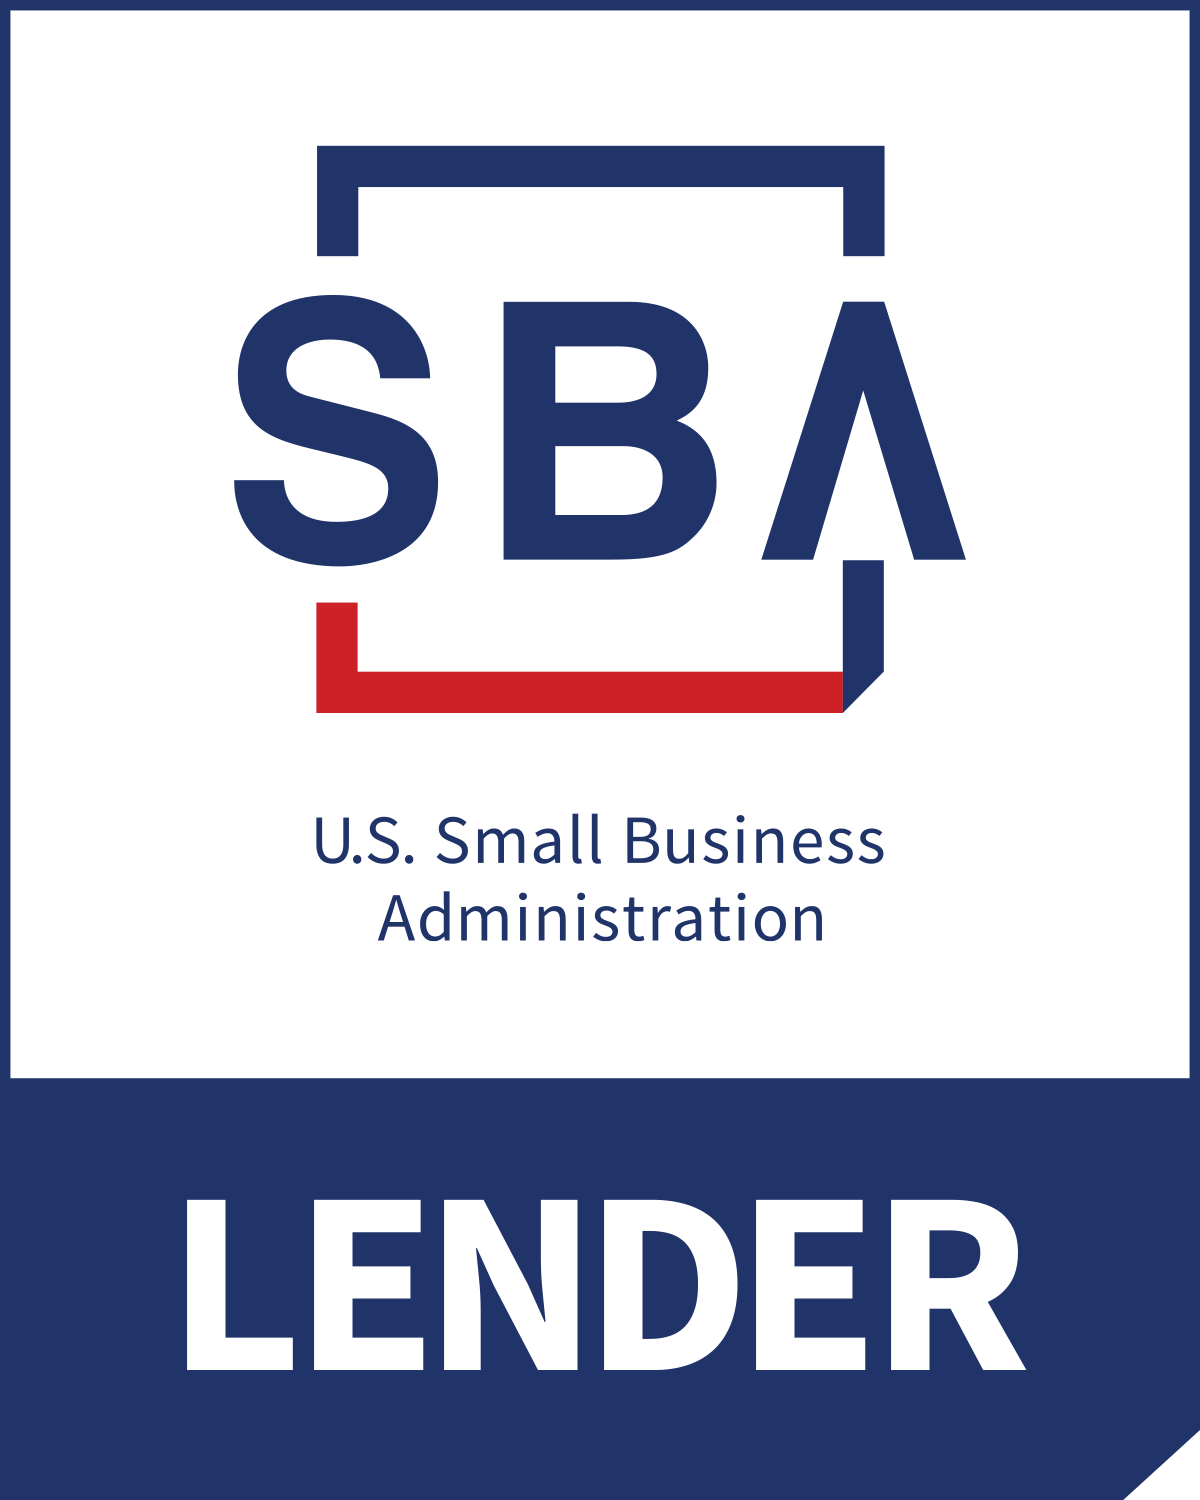  Approved to offer SBA loan products under SBA’s Lender/Microloan Programs. 